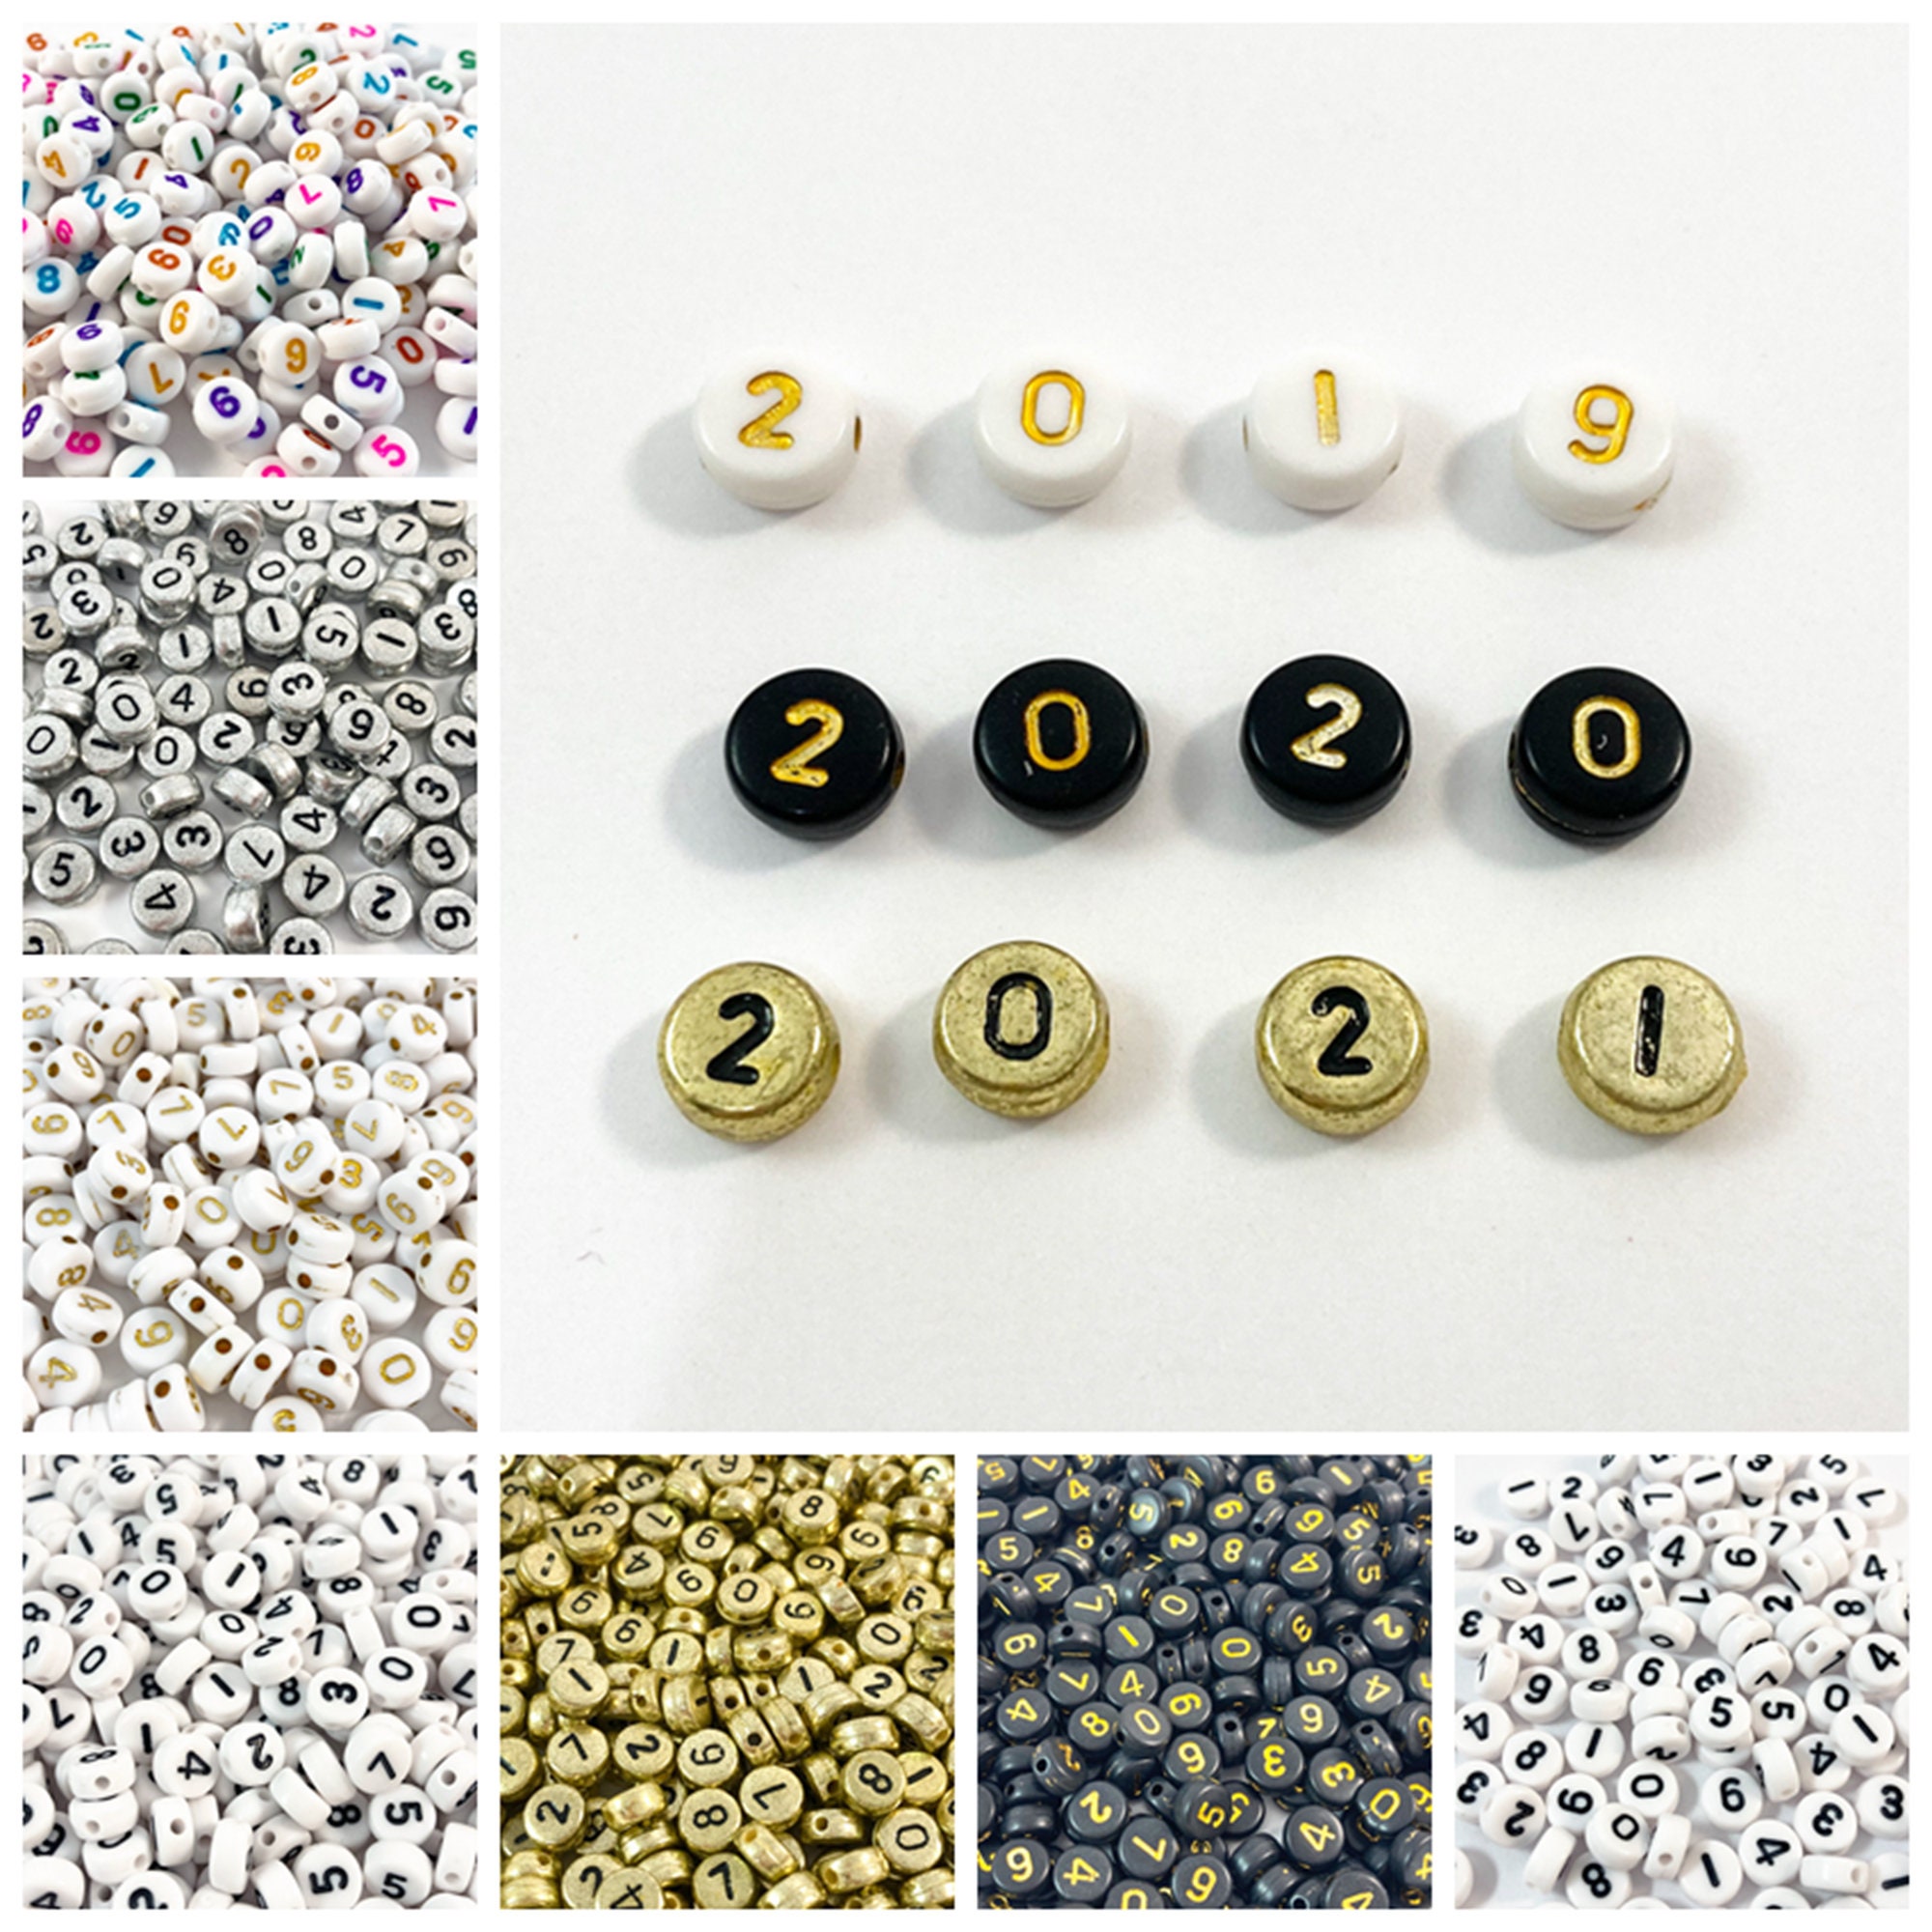 7mm acrylic number beads, gold number beads, acrylic jewelry beads, letter  and number beads, jewelry making beads, bracelet beads